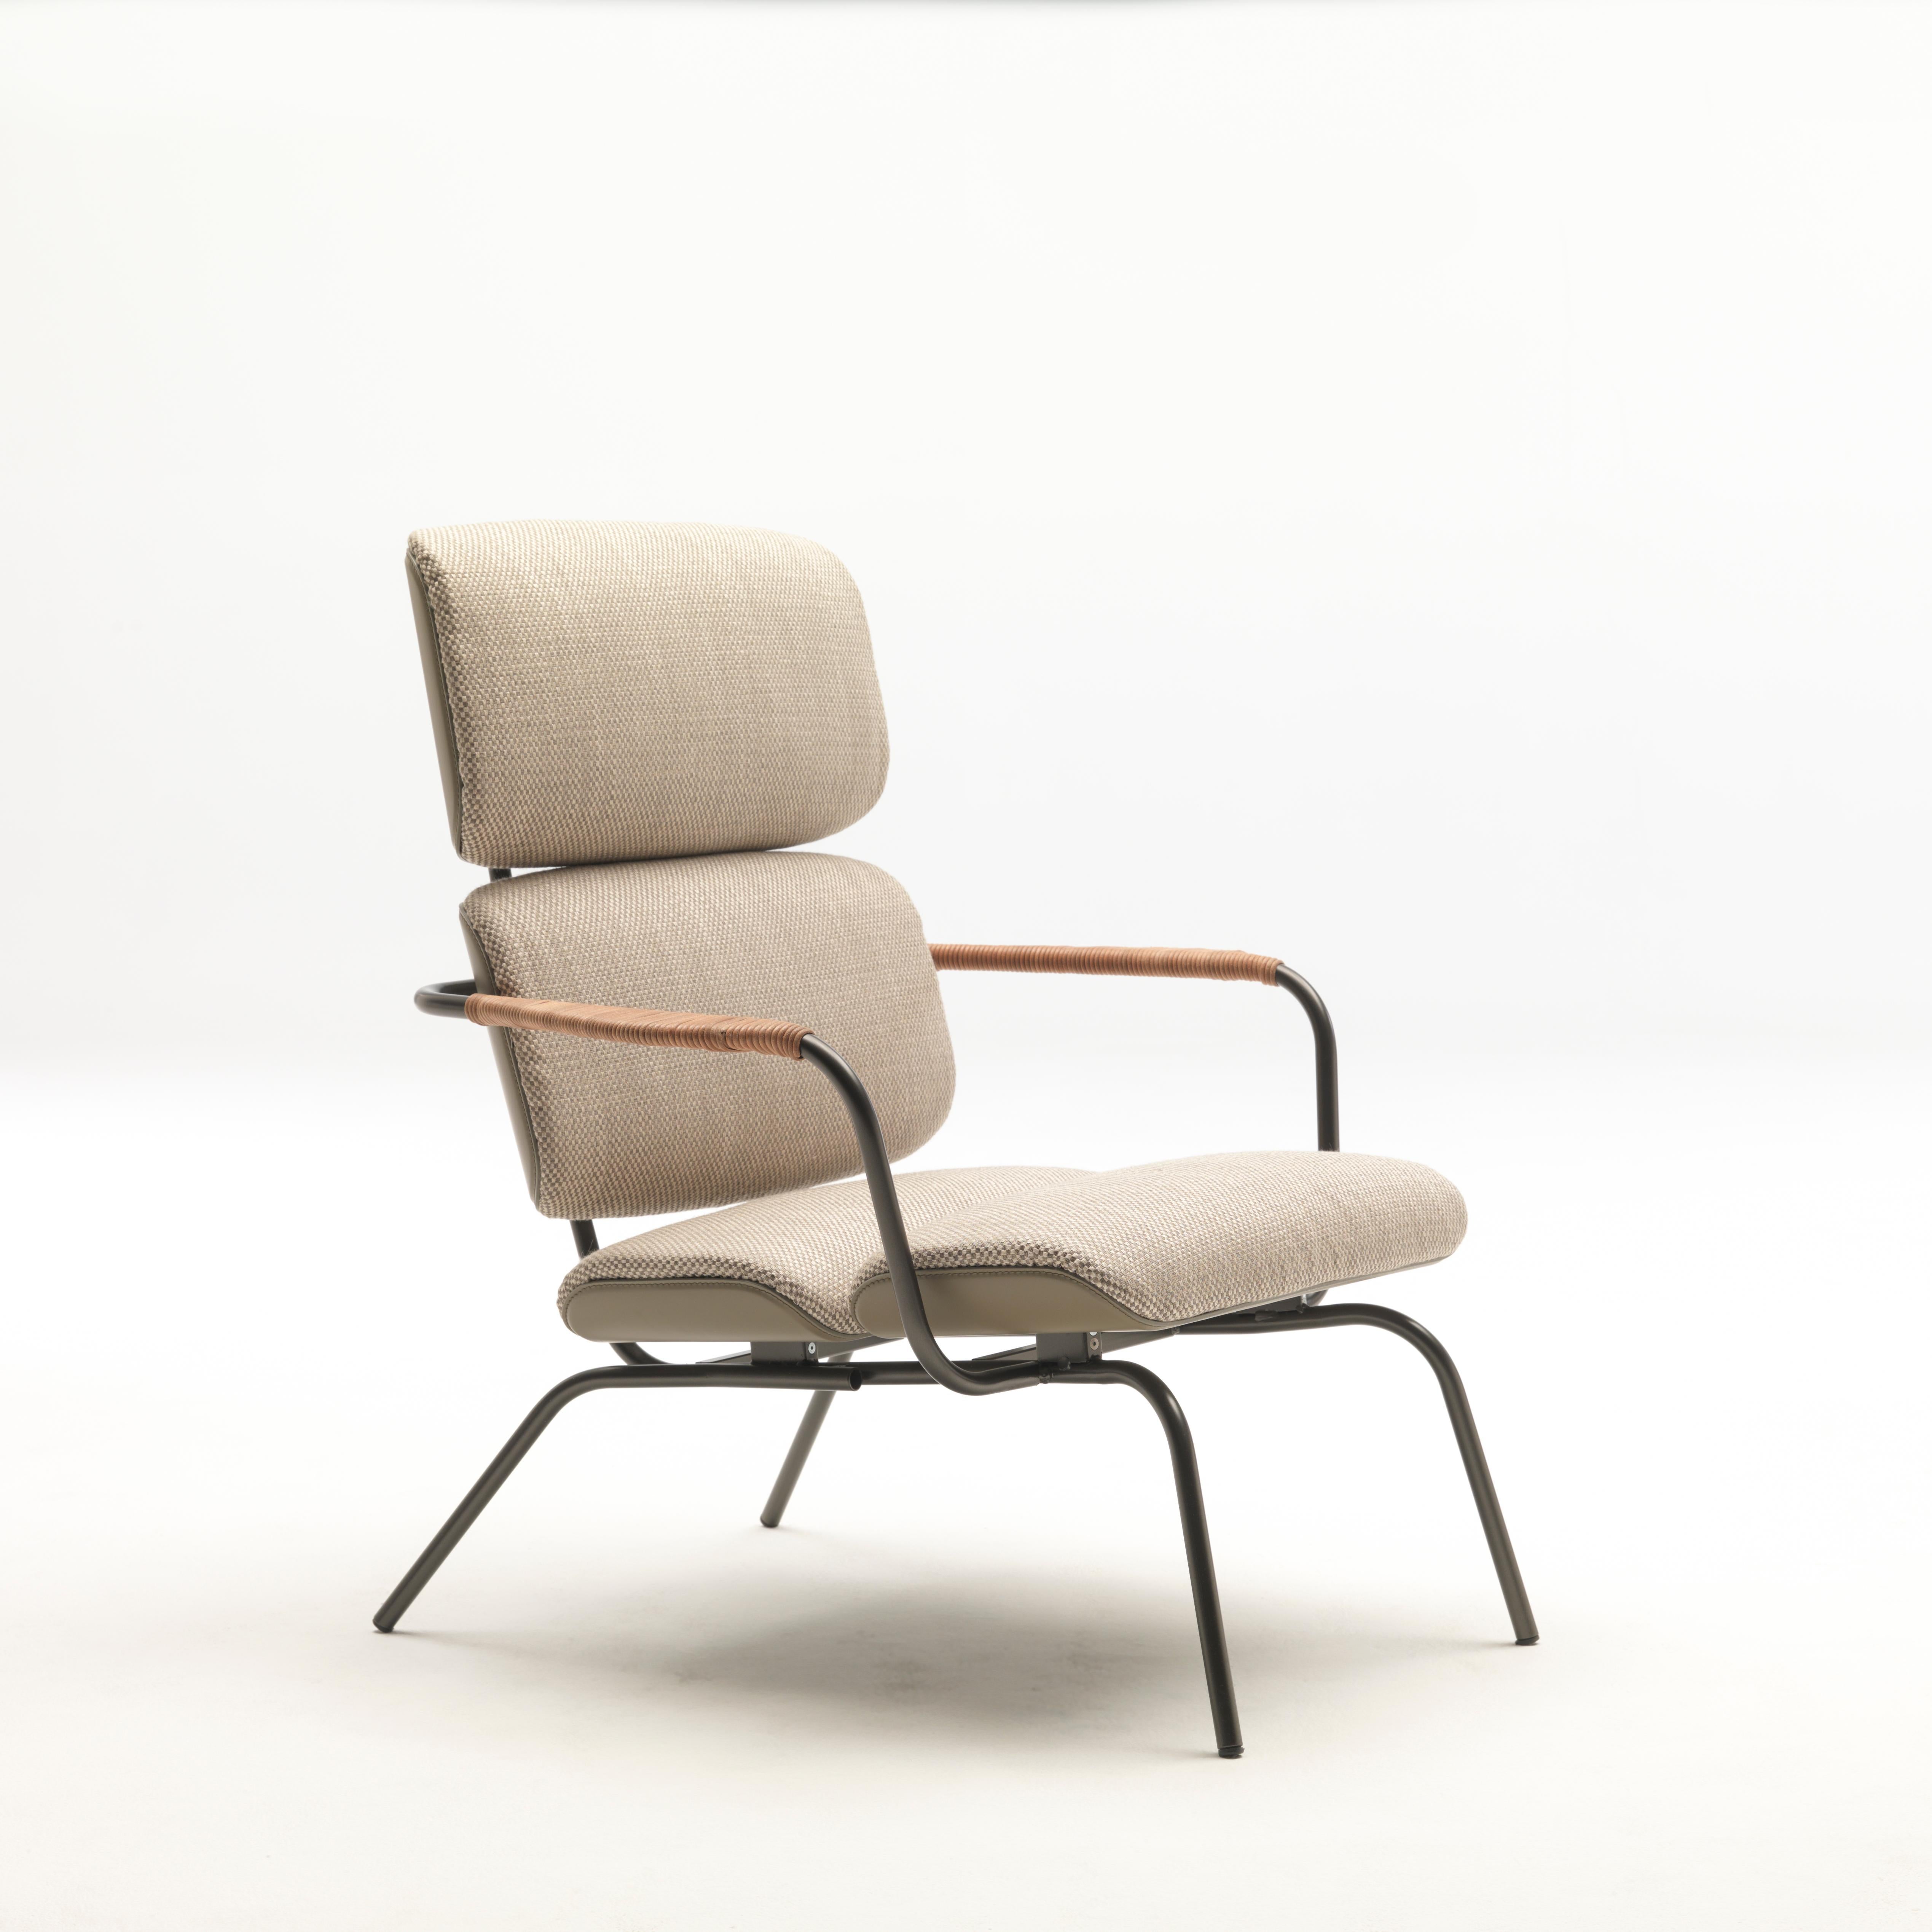 Bluemoon lounge chair by Patrick Jouin
Materials: BlueMoon armchair in bronze lacquered metal with seat and backrest in molded wood, upholstered in leather and fabric. Metal armrests are covered with braided natural leather thread. in fabric